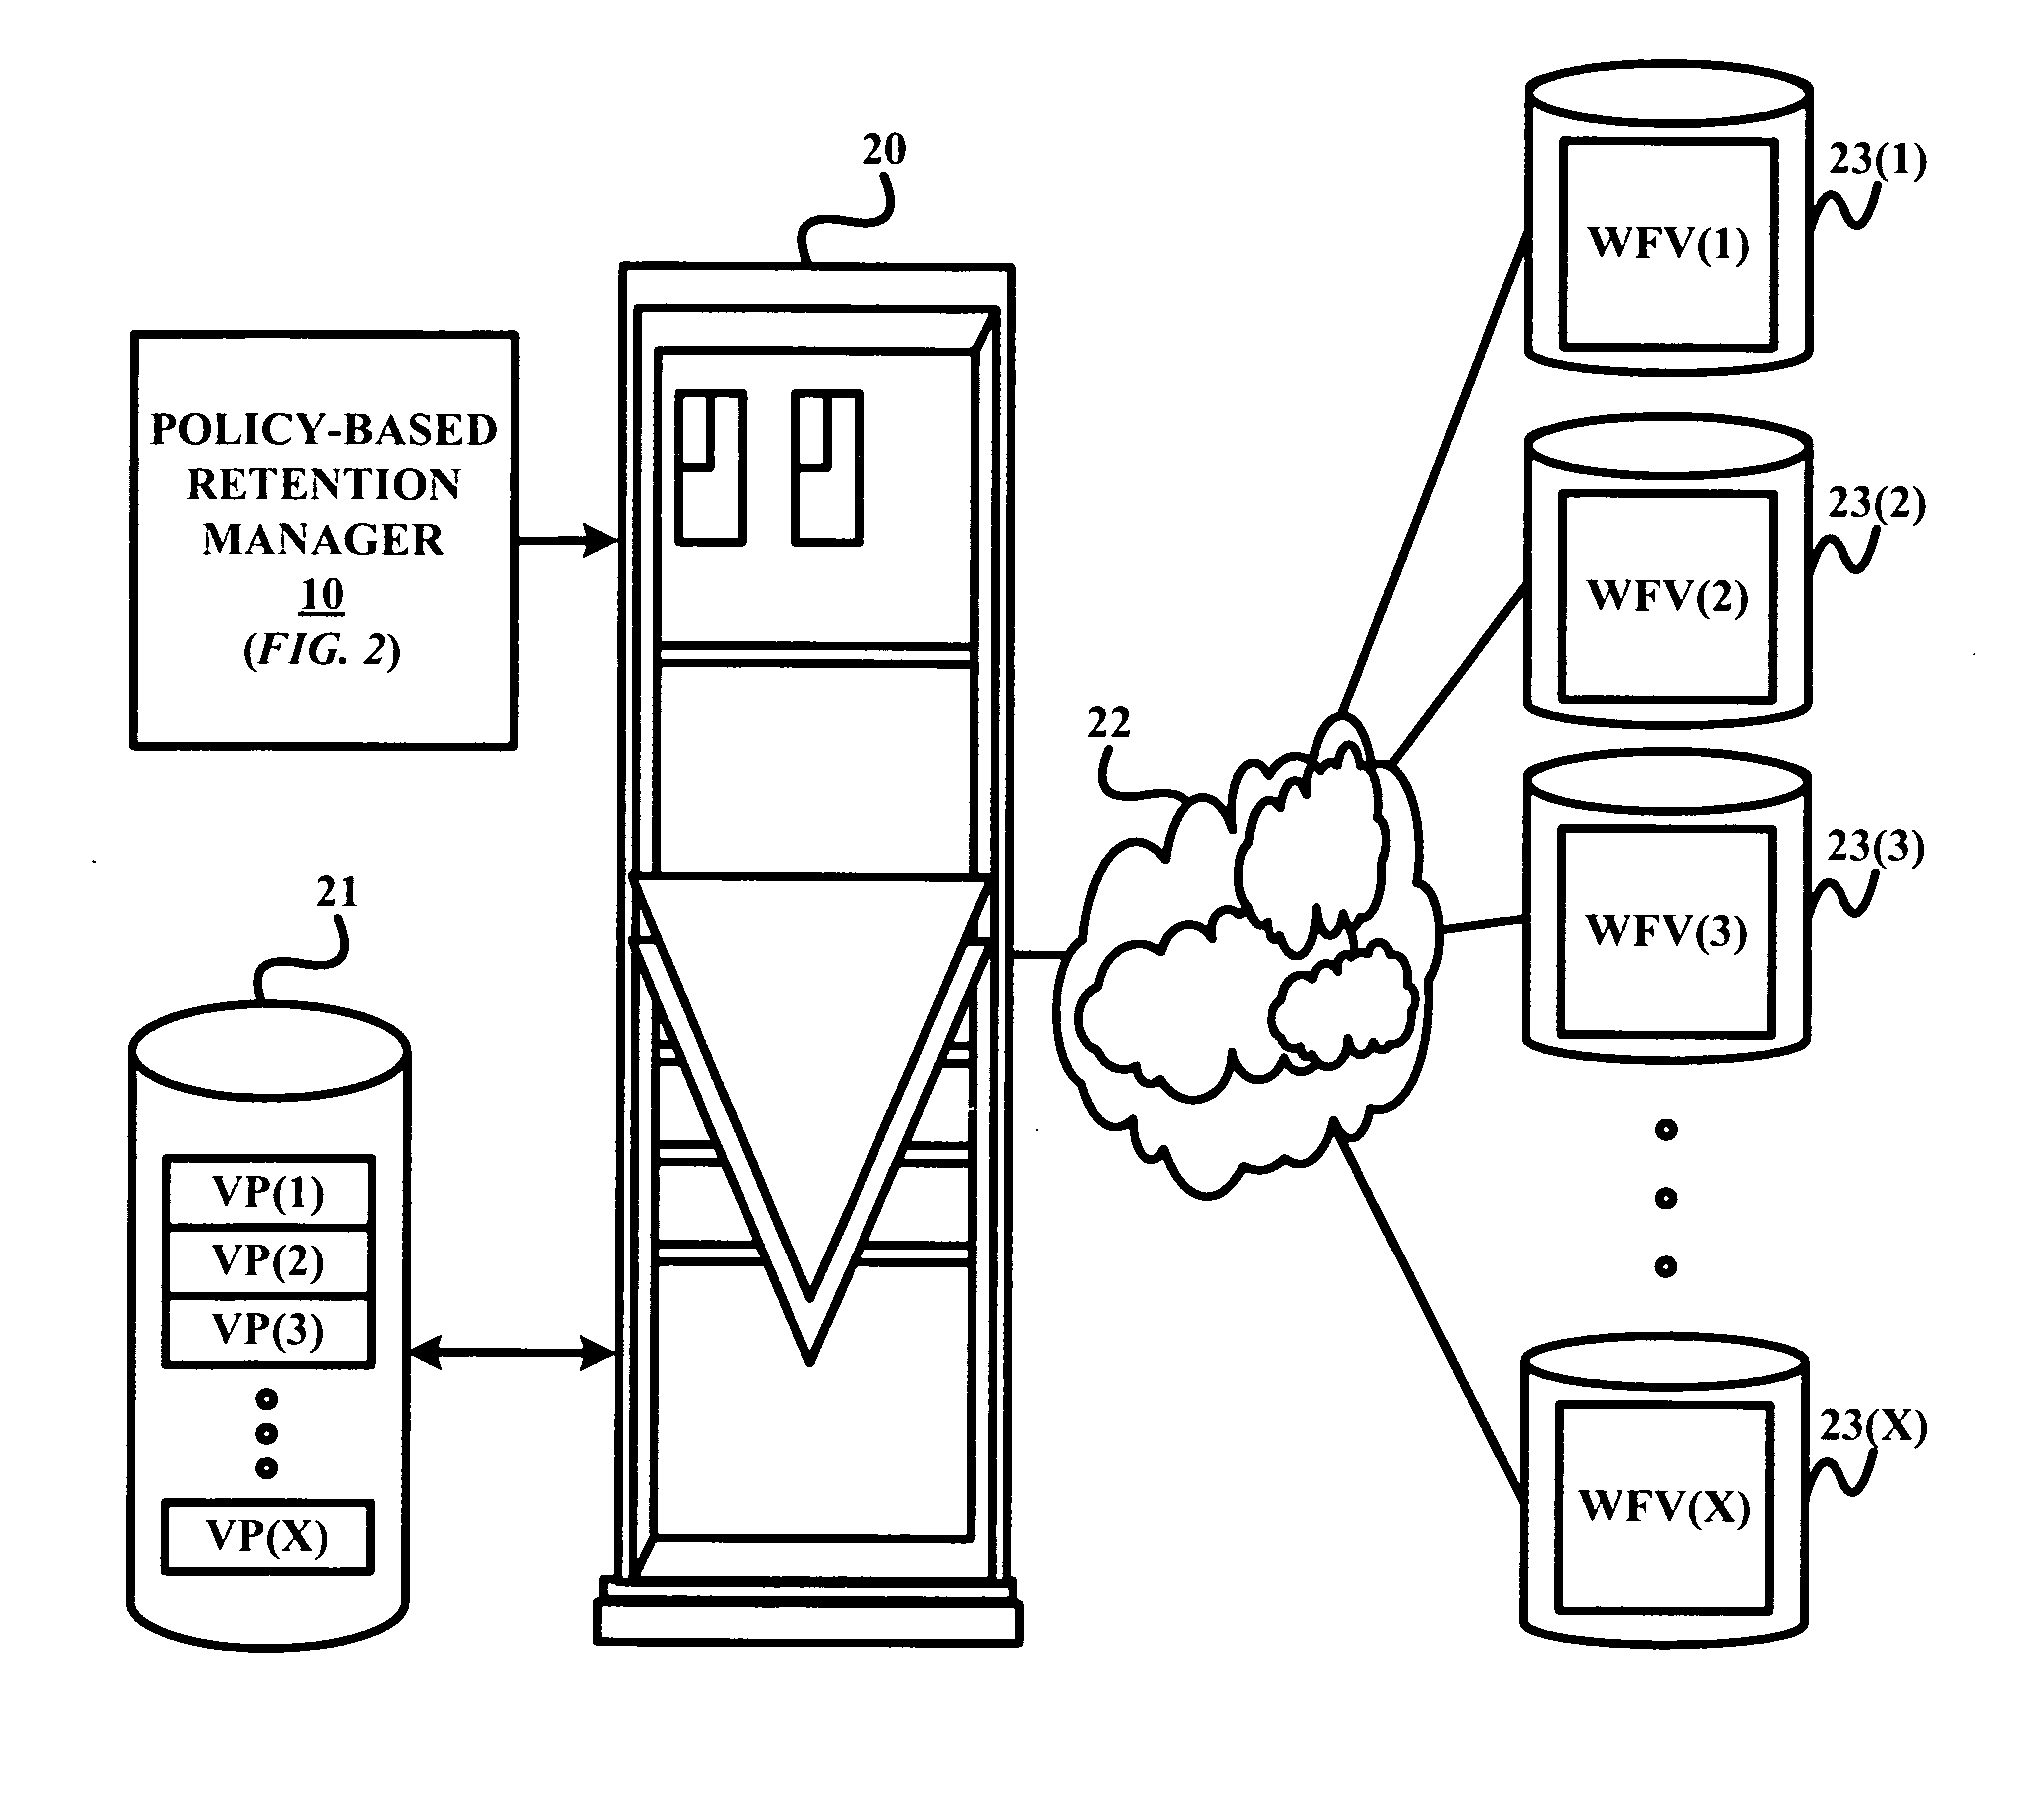 Method for protecting and managing retention of data on worm media